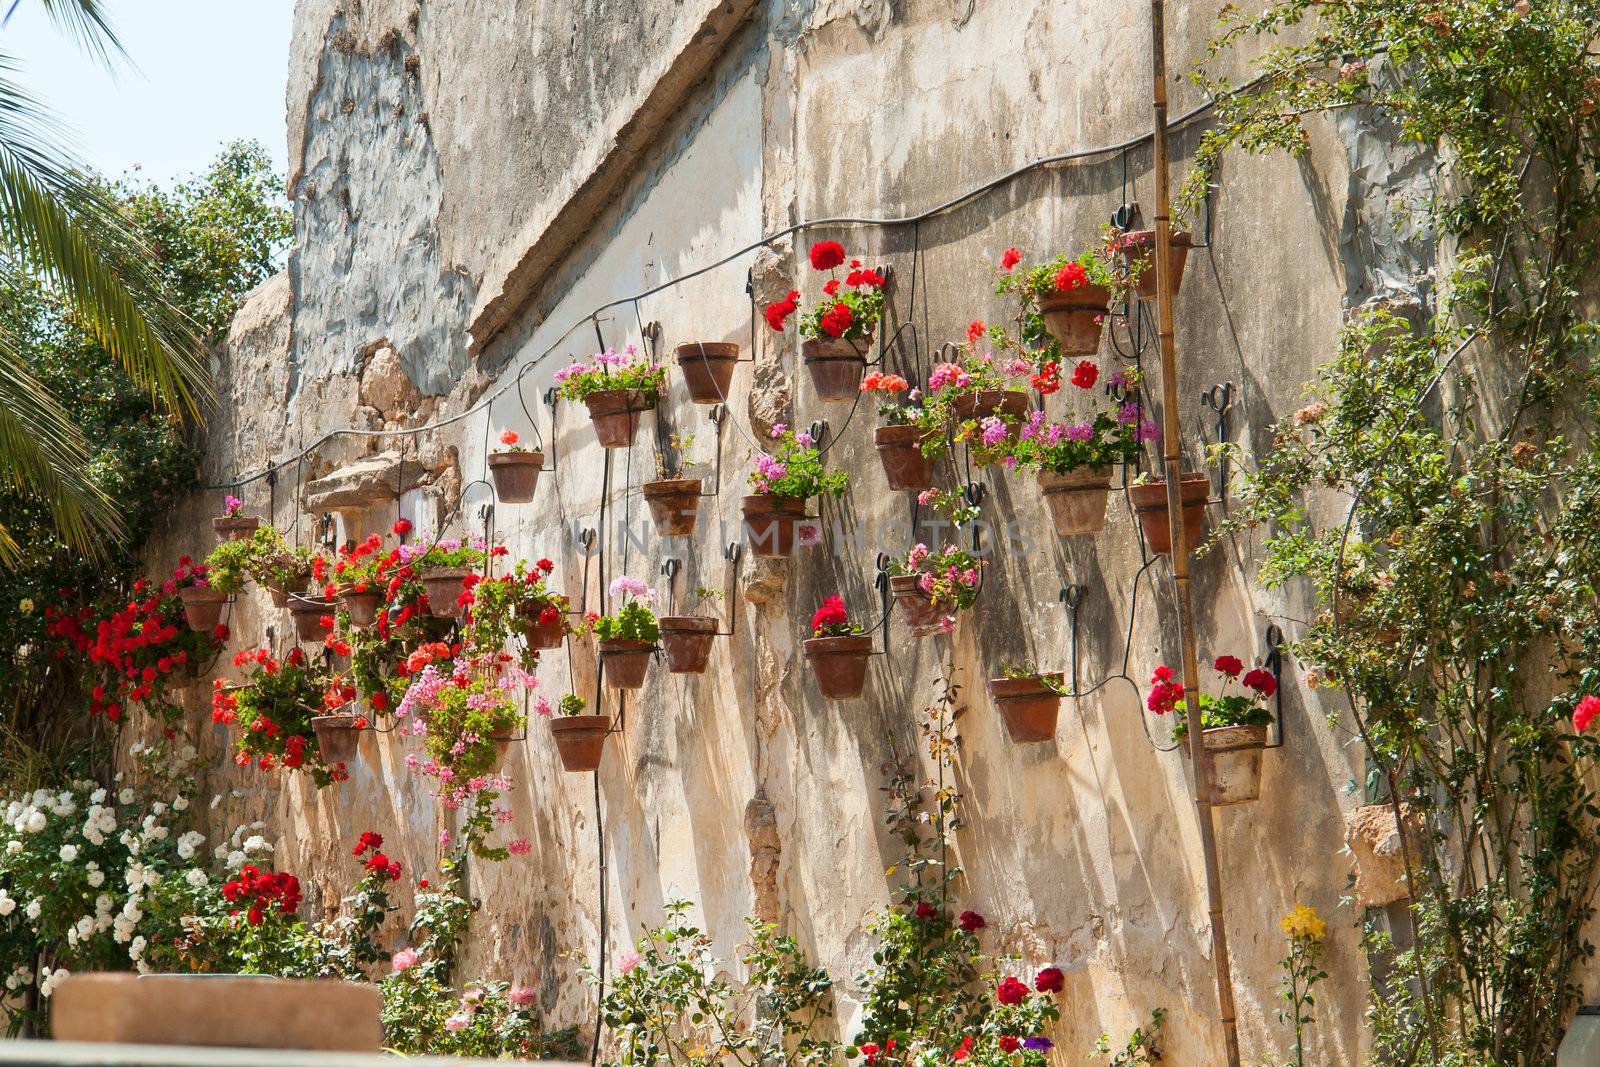 Typical wall planter pots Tuscany Italy style by Ronyzmbow